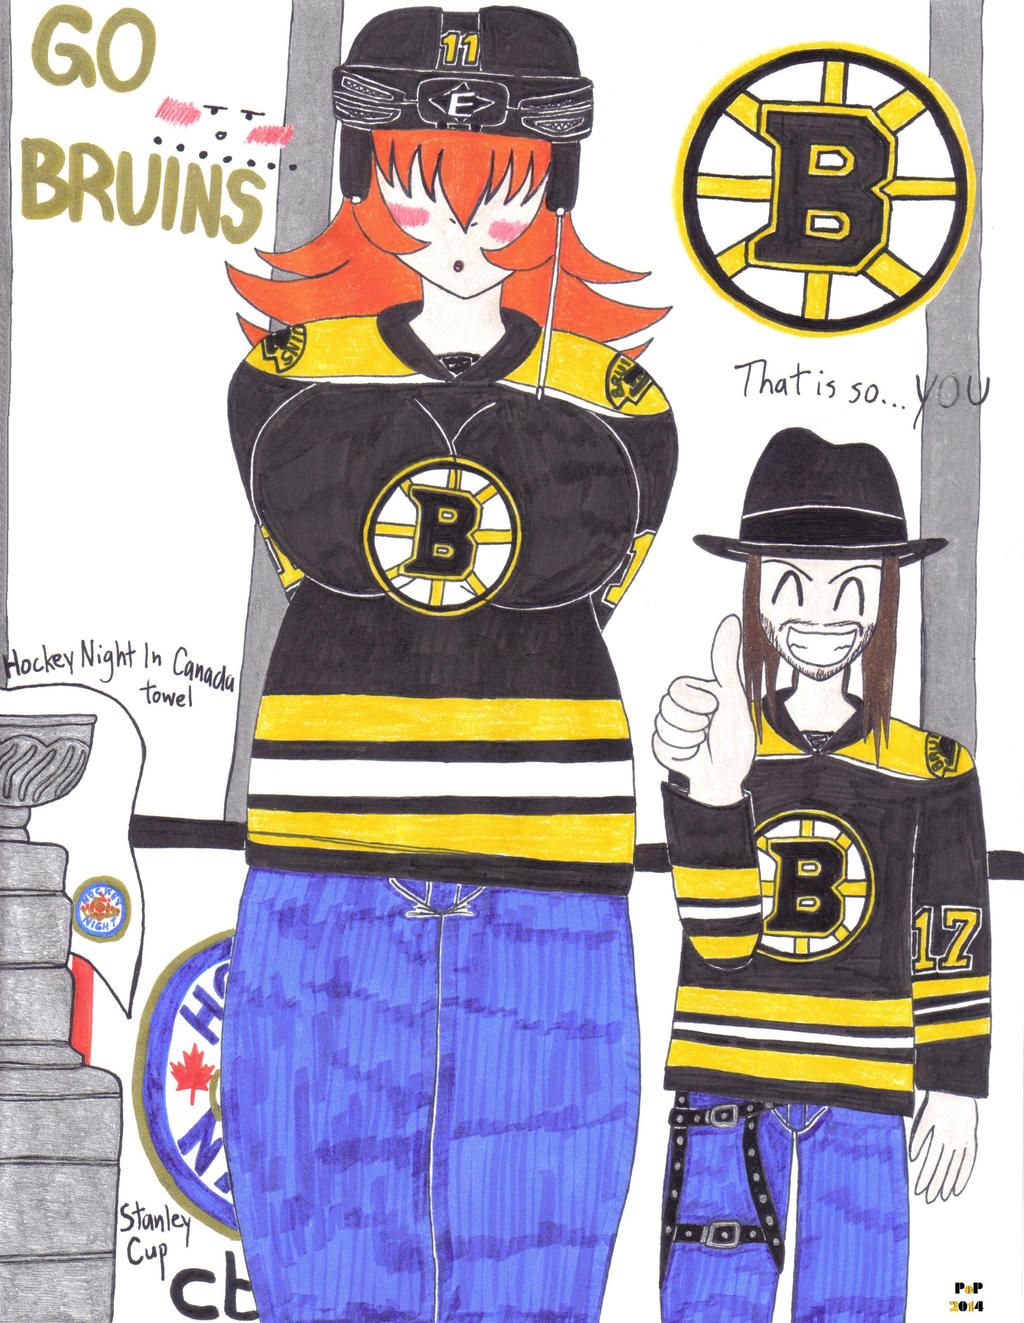 grizzly_for_the_boston_bruins_by_prince_of_pop-d821to1.jpg